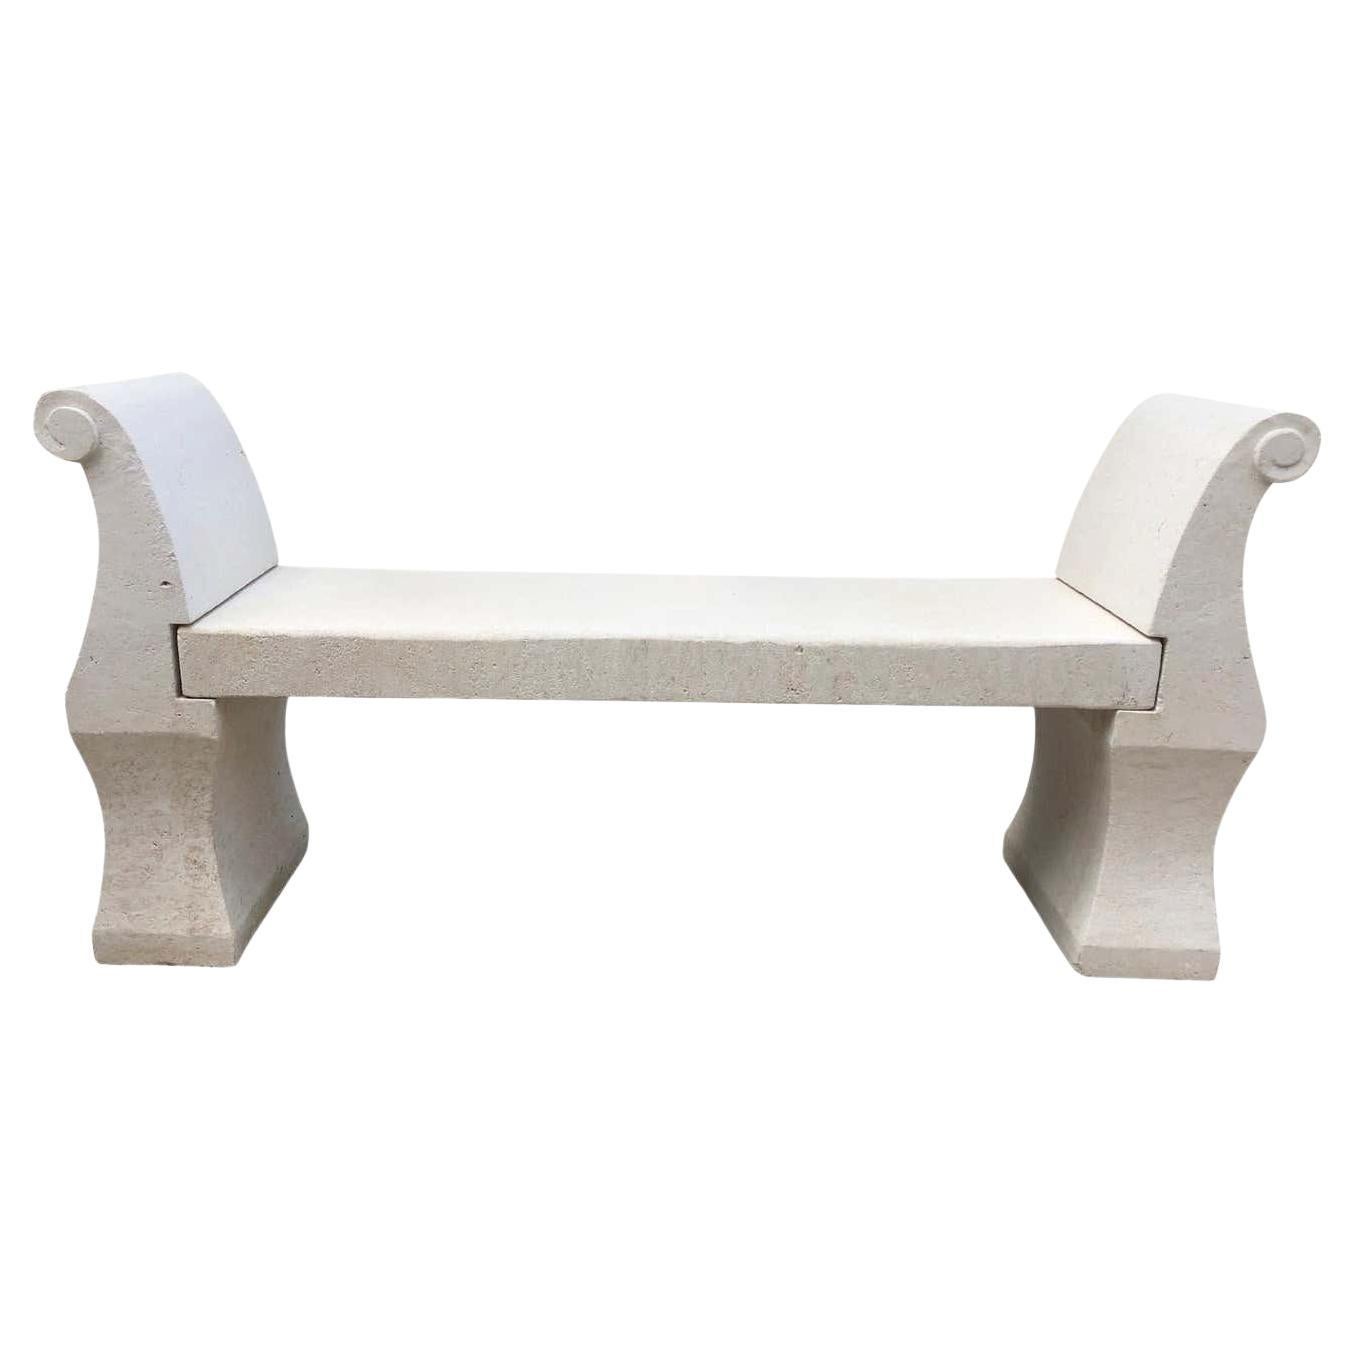 Hand-Carved Limestone Bench